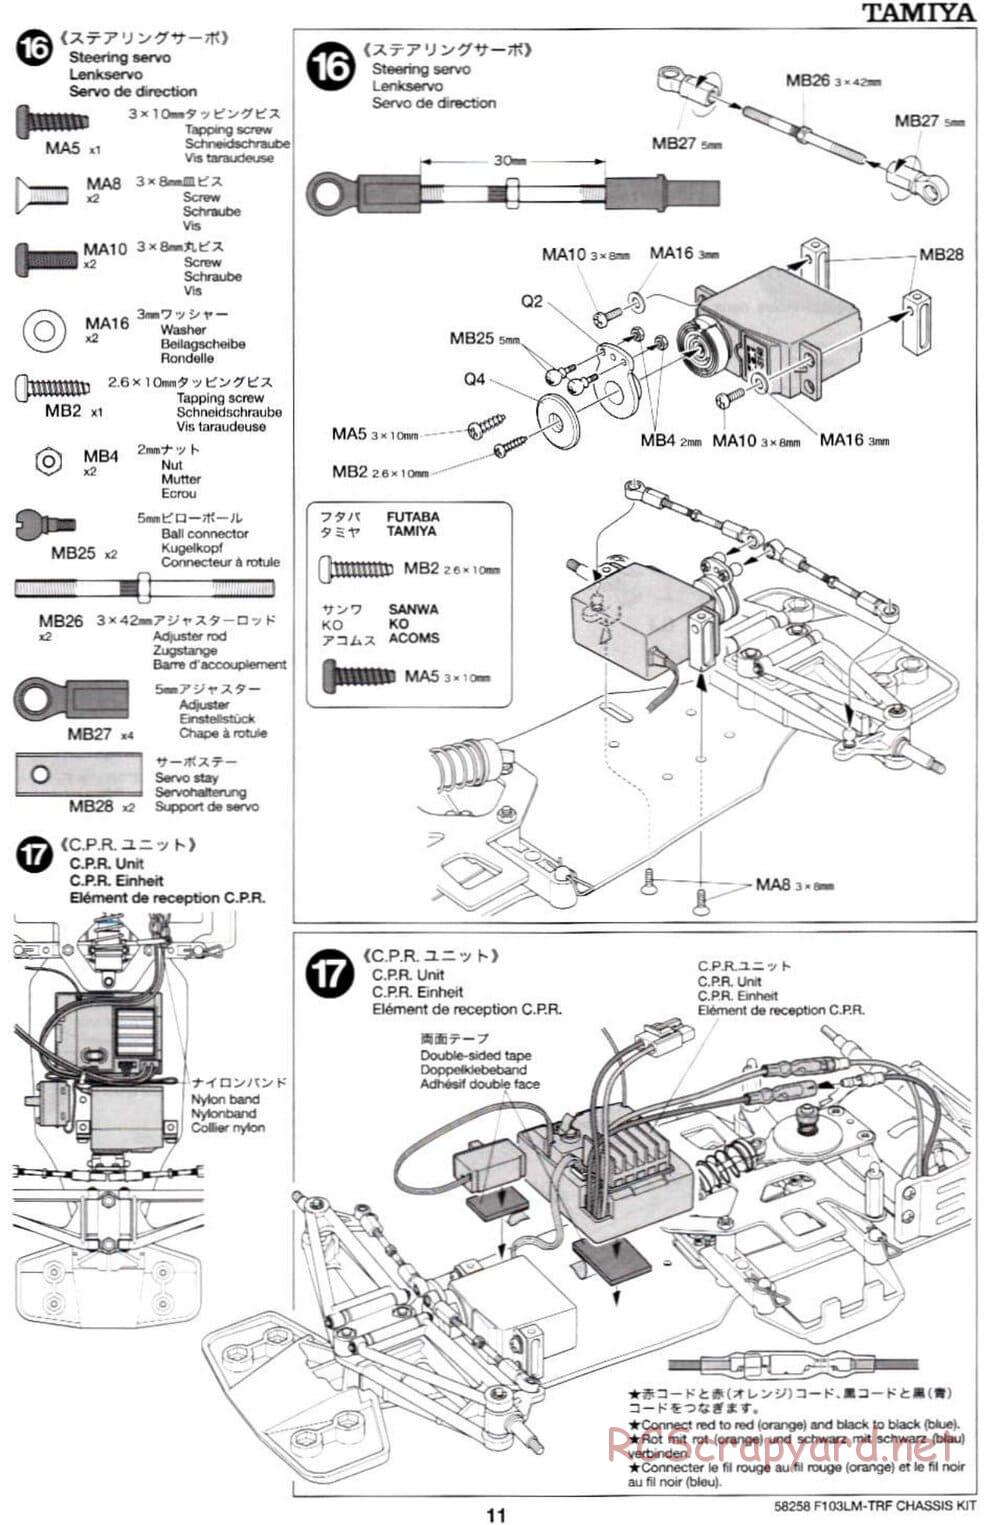 Tamiya - F103LM TRF Special Chassis - Manual - Page 11